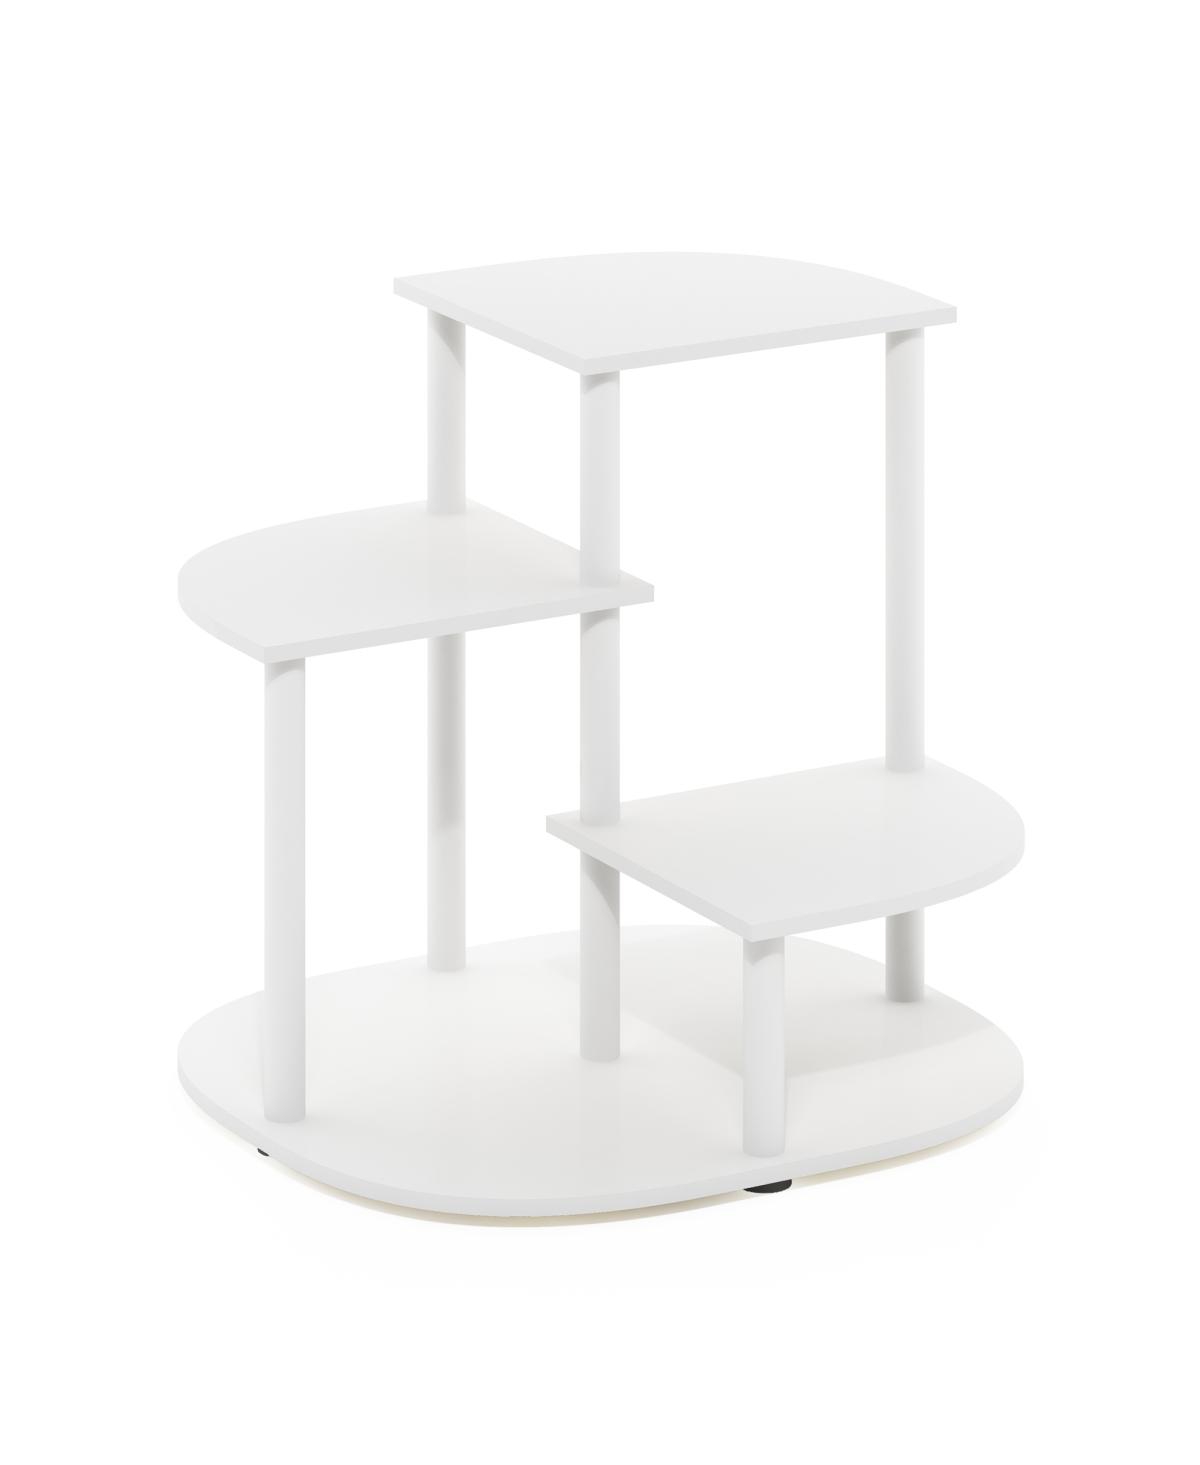 Celuka 3-Tier Indoor Outdoor Potted Plant Stand Holder for Multiple Plants, White & Virgin White - White